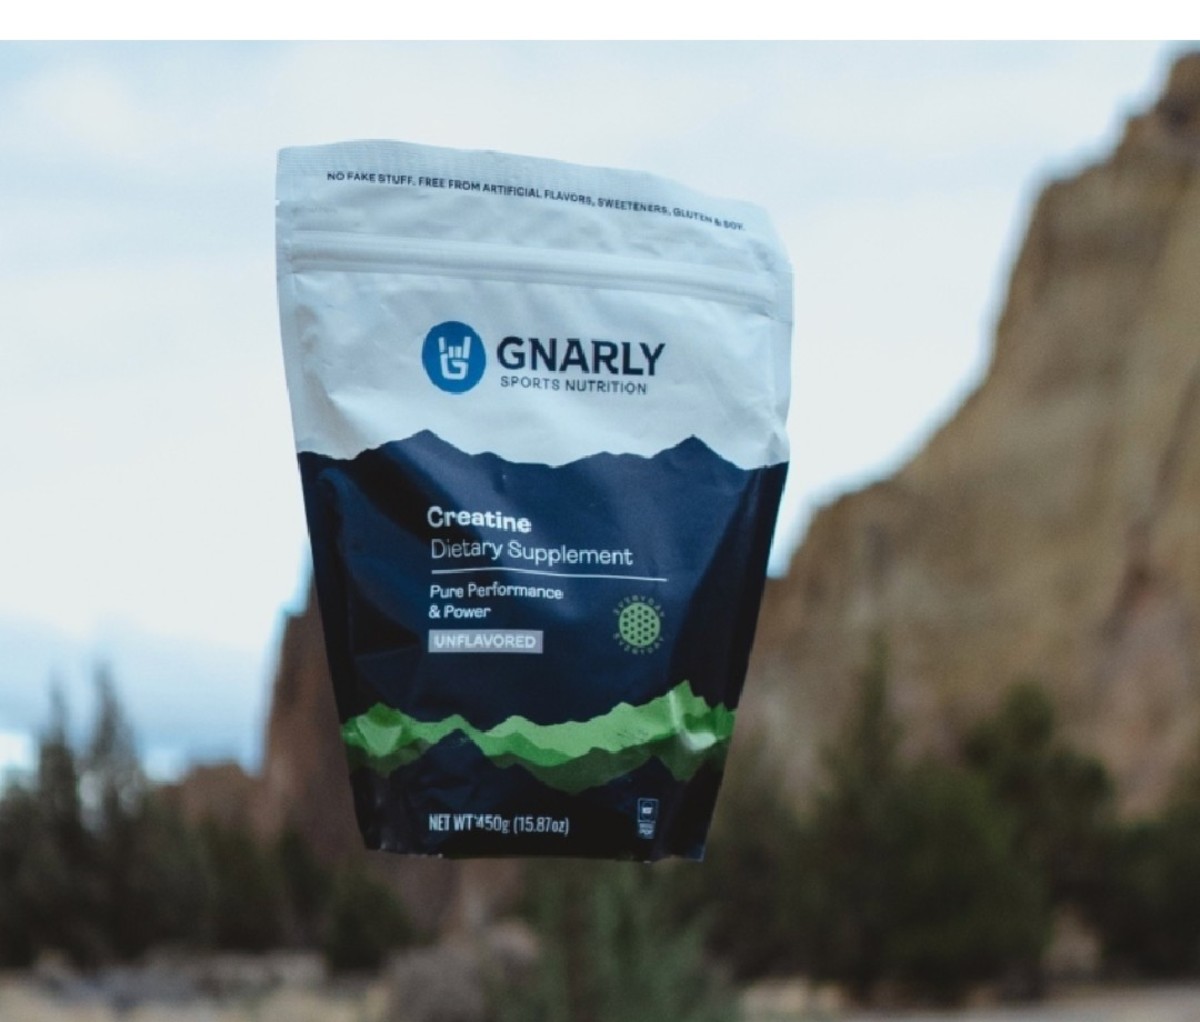 Bag of Gnarly Creatine "floating" above an outdoor scene background.